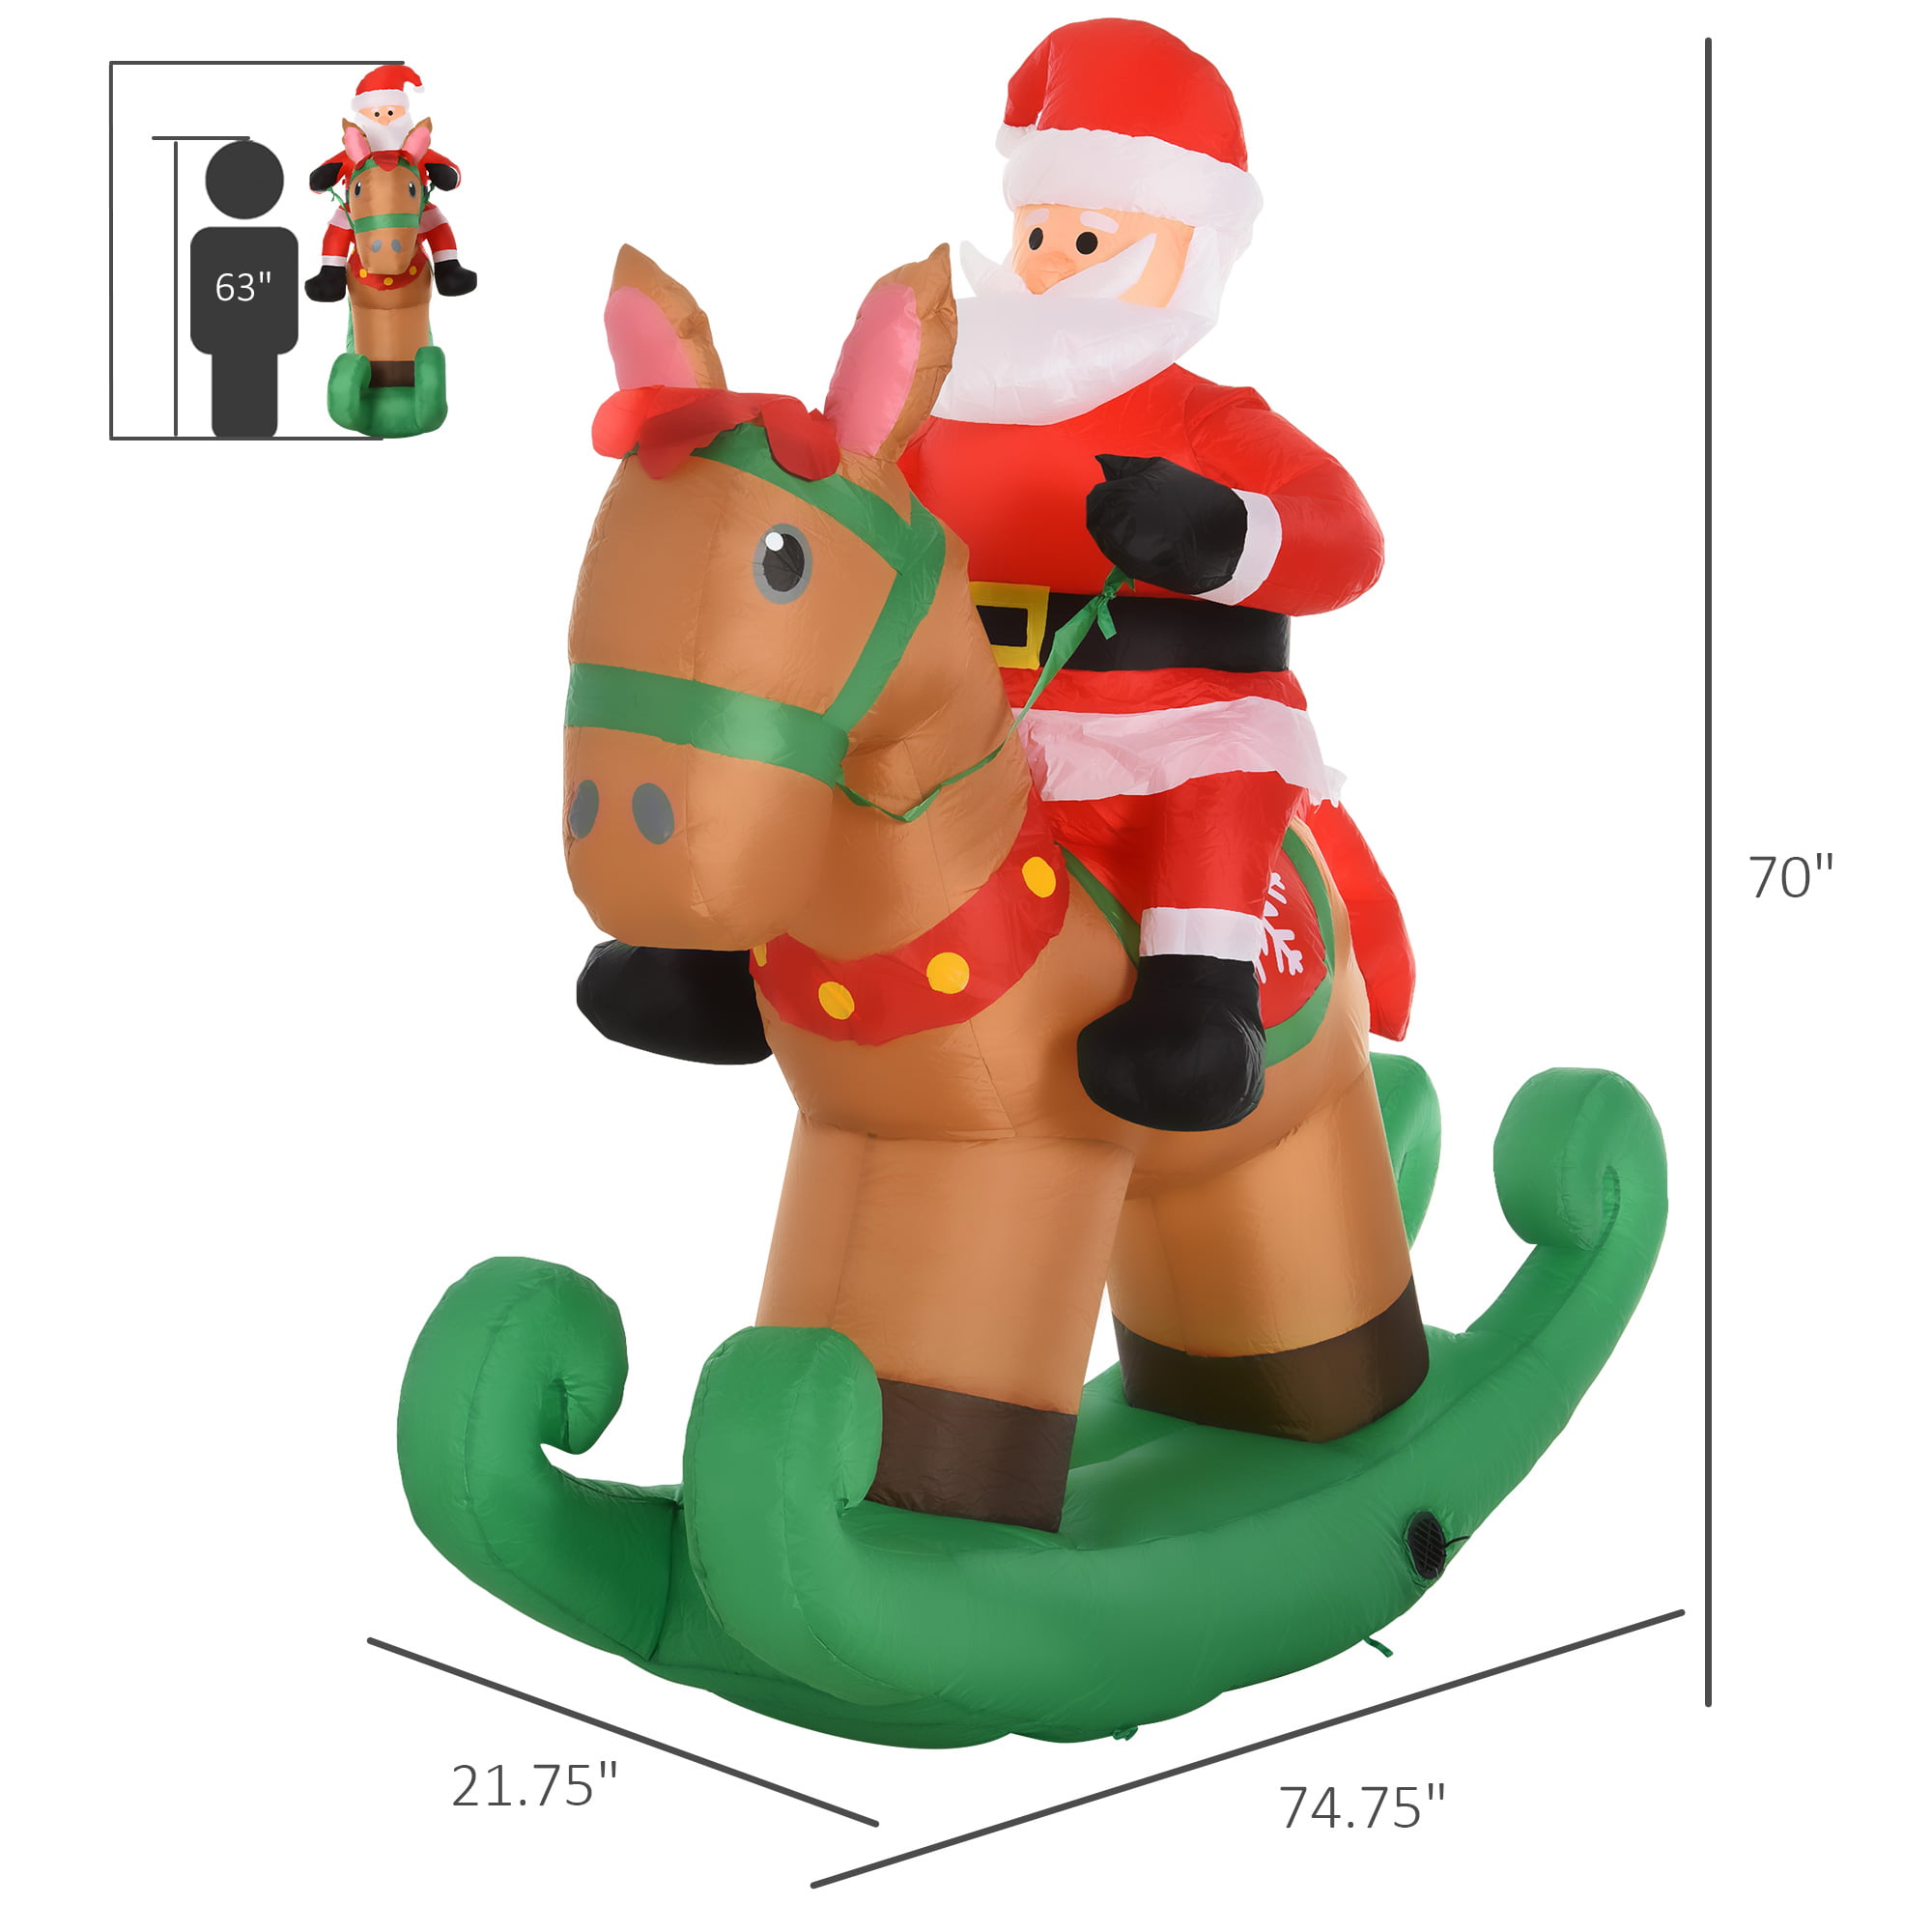 NEW,6 FT Airblown Inflatable Santa Claus Christmas Decoration with Inside Lights 